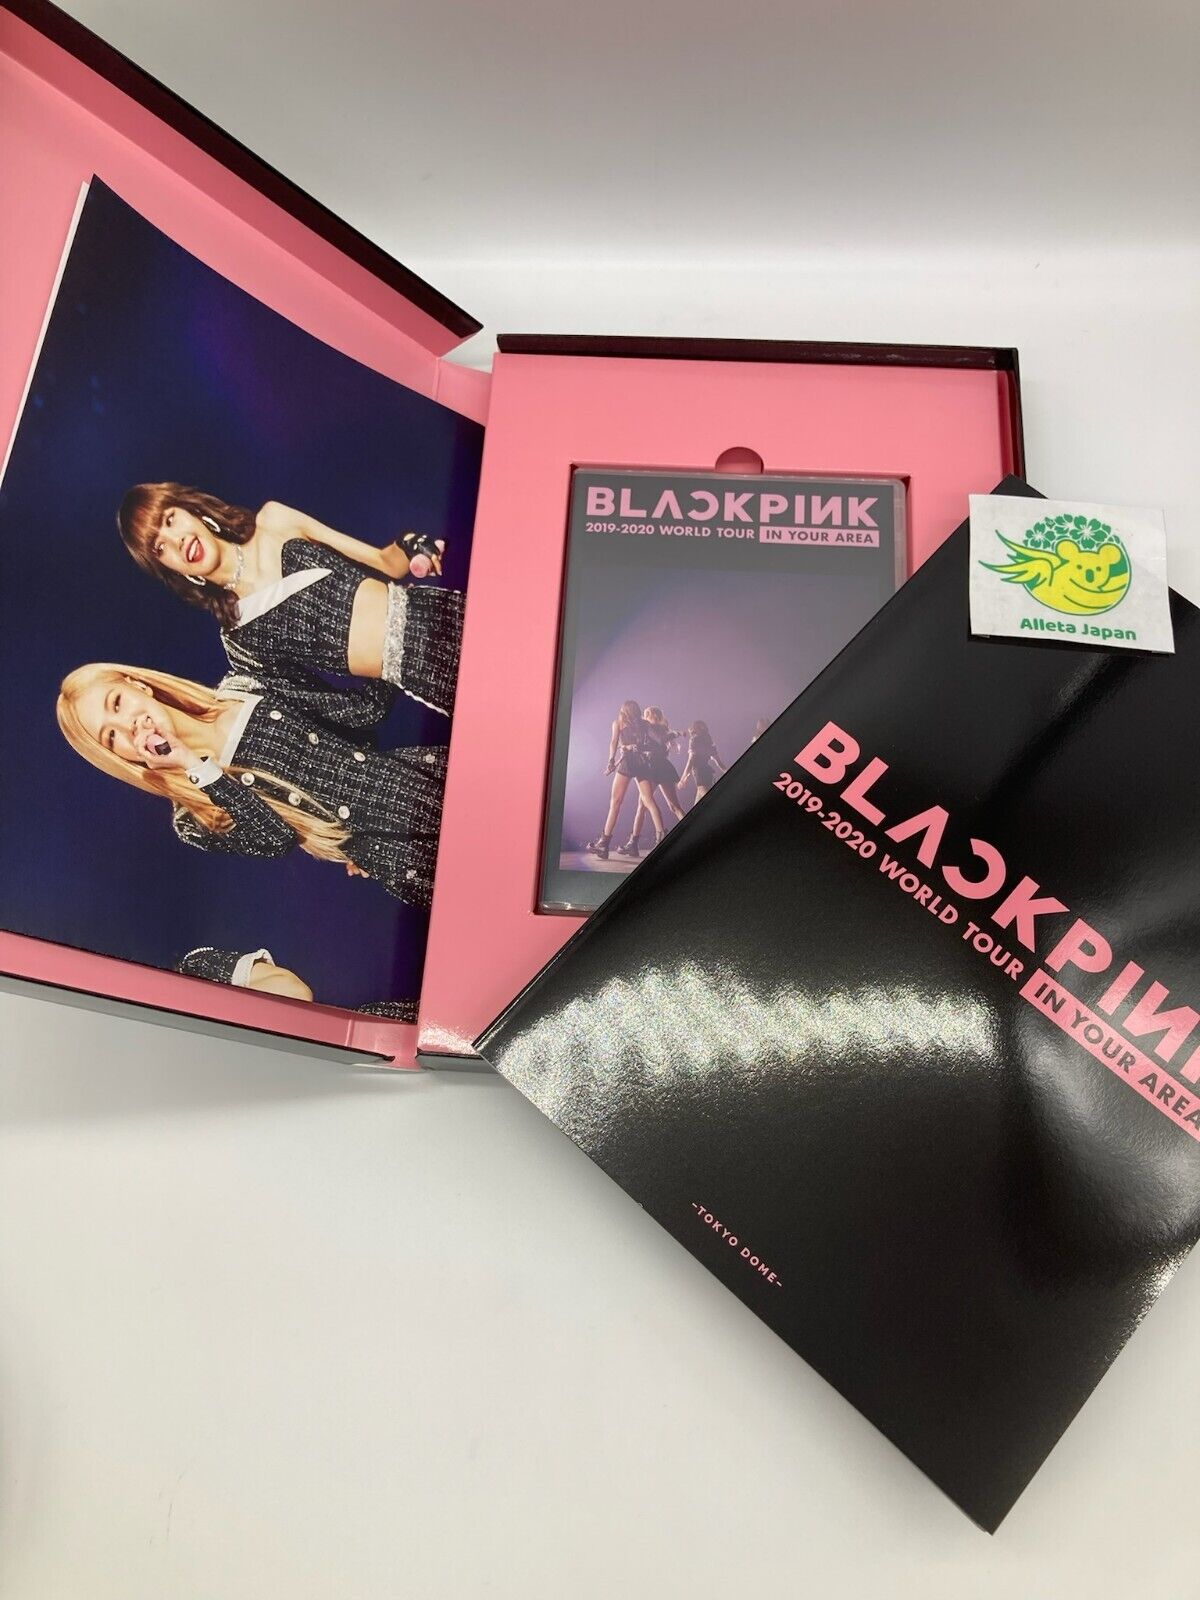 Blackpink 20192020 World Tour In Your Area Tokyo Dome Bluray First Limit  edition